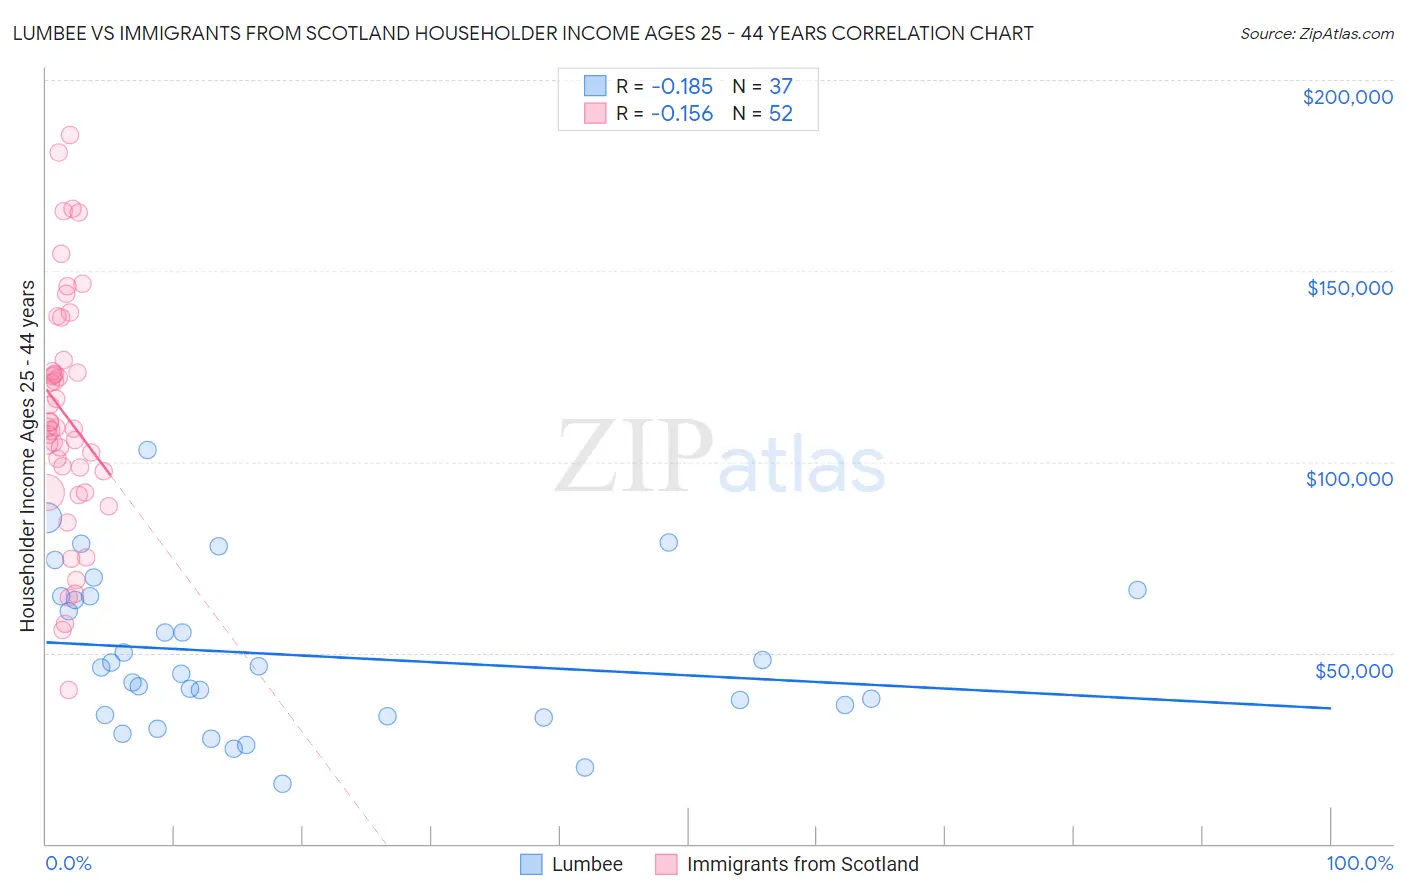 Lumbee vs Immigrants from Scotland Householder Income Ages 25 - 44 years